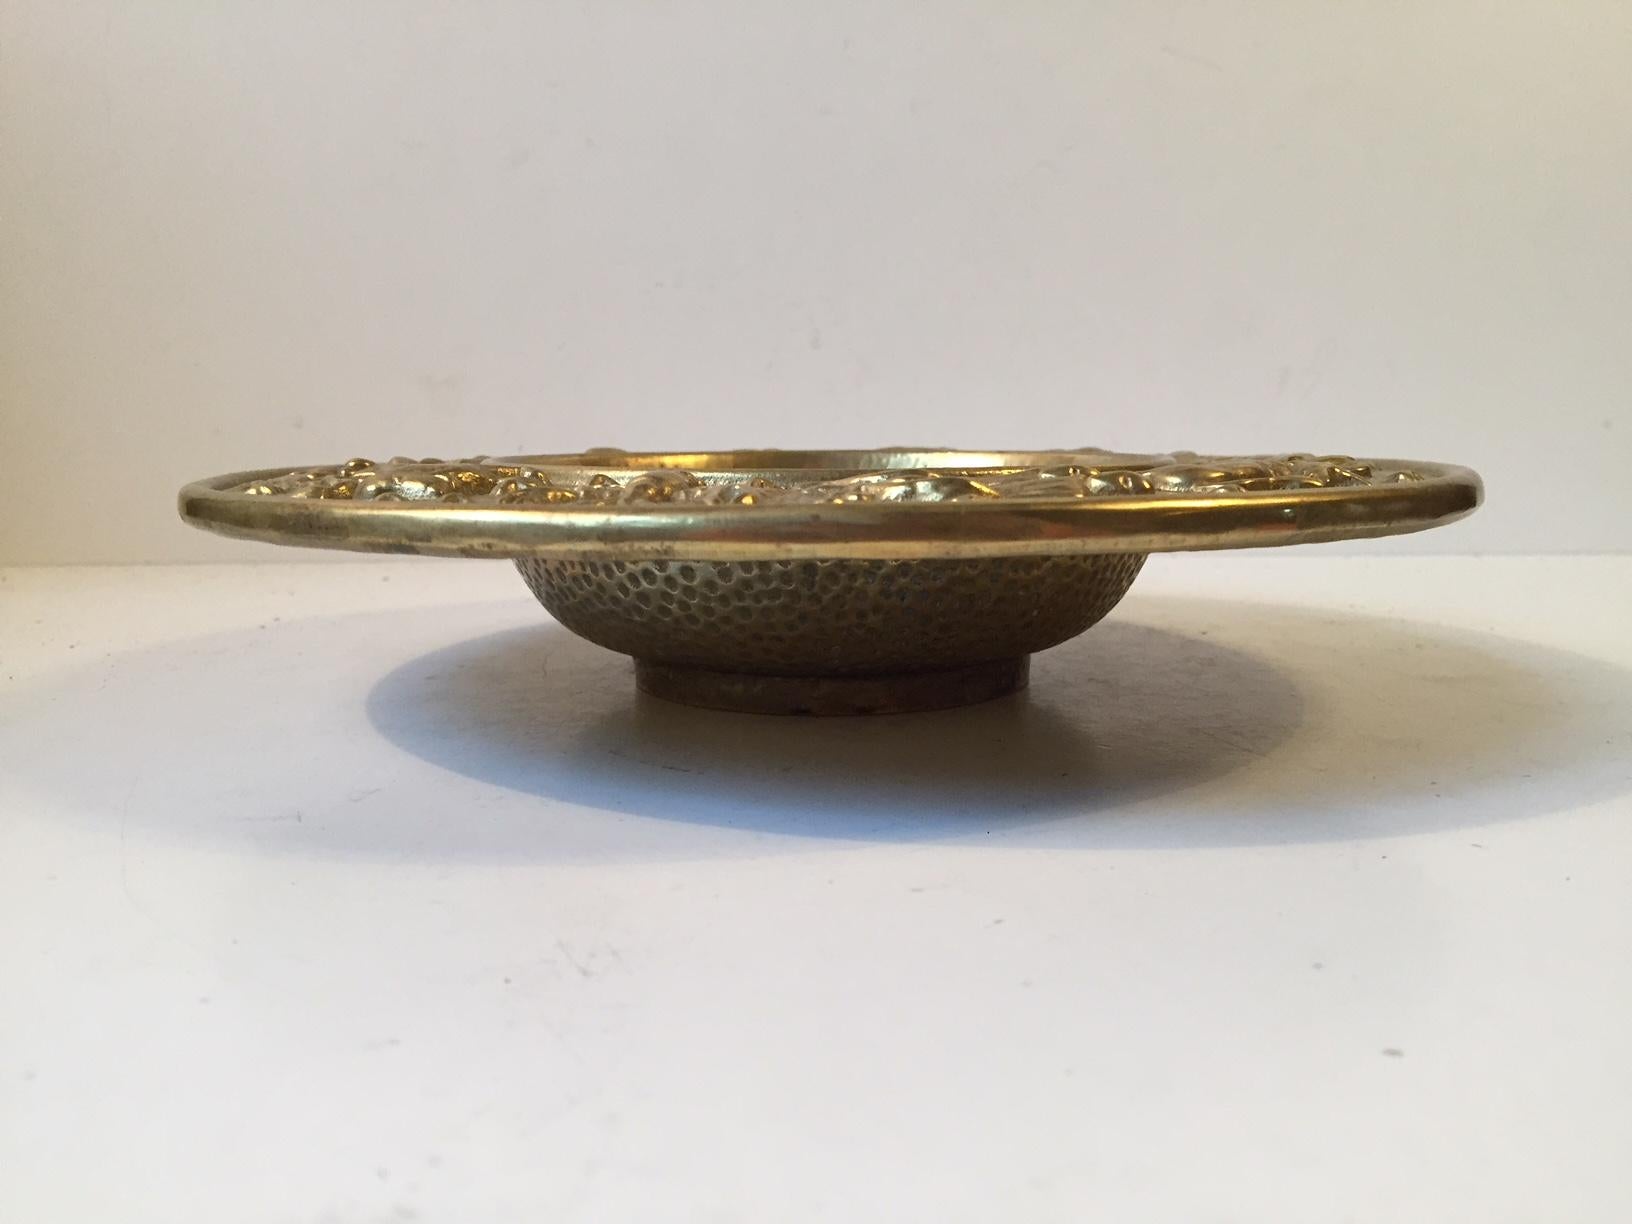 Decorative and heavy bronze bowl with Zodiac motifs/signs and a surface that mimics the surface of the moon. It was manufactured and designed by NM/Nordisk Malm in Denmark during the late 1940s. Stylistically it borderlines between Art Deco and